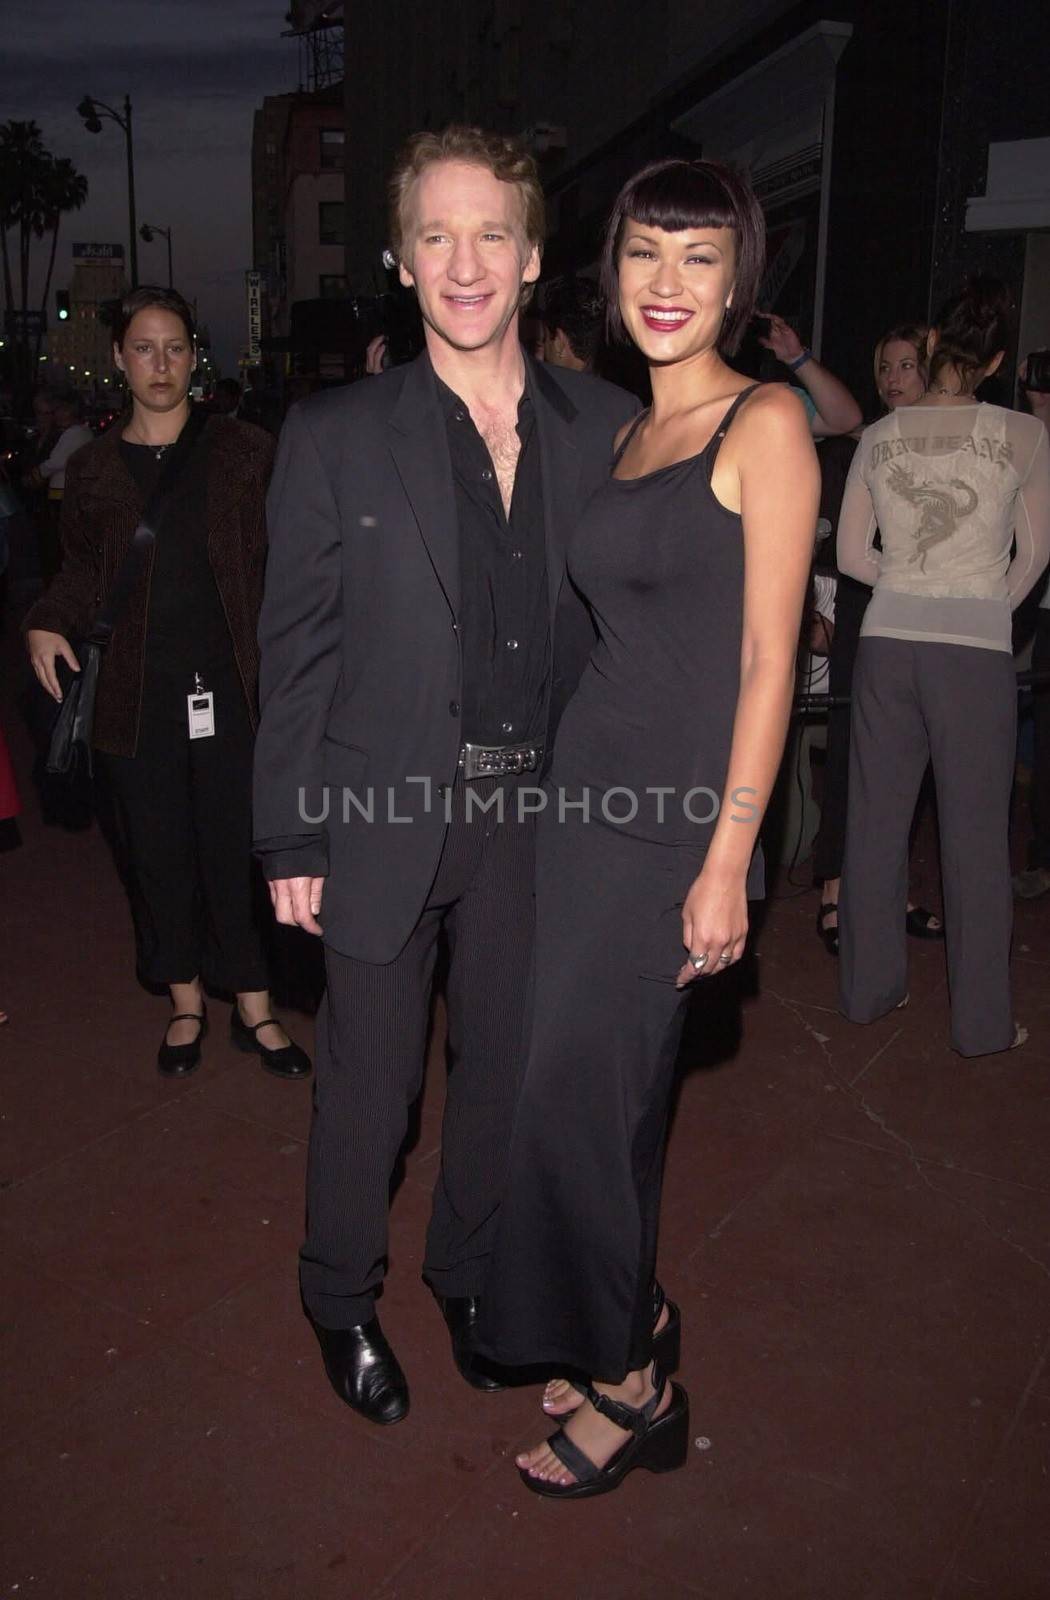 Bill Maher and date at "Framed: A Photo Retrospective" sponsored by Vogue and Donna Karan Eyewear. Santa Monica, 04-13-00